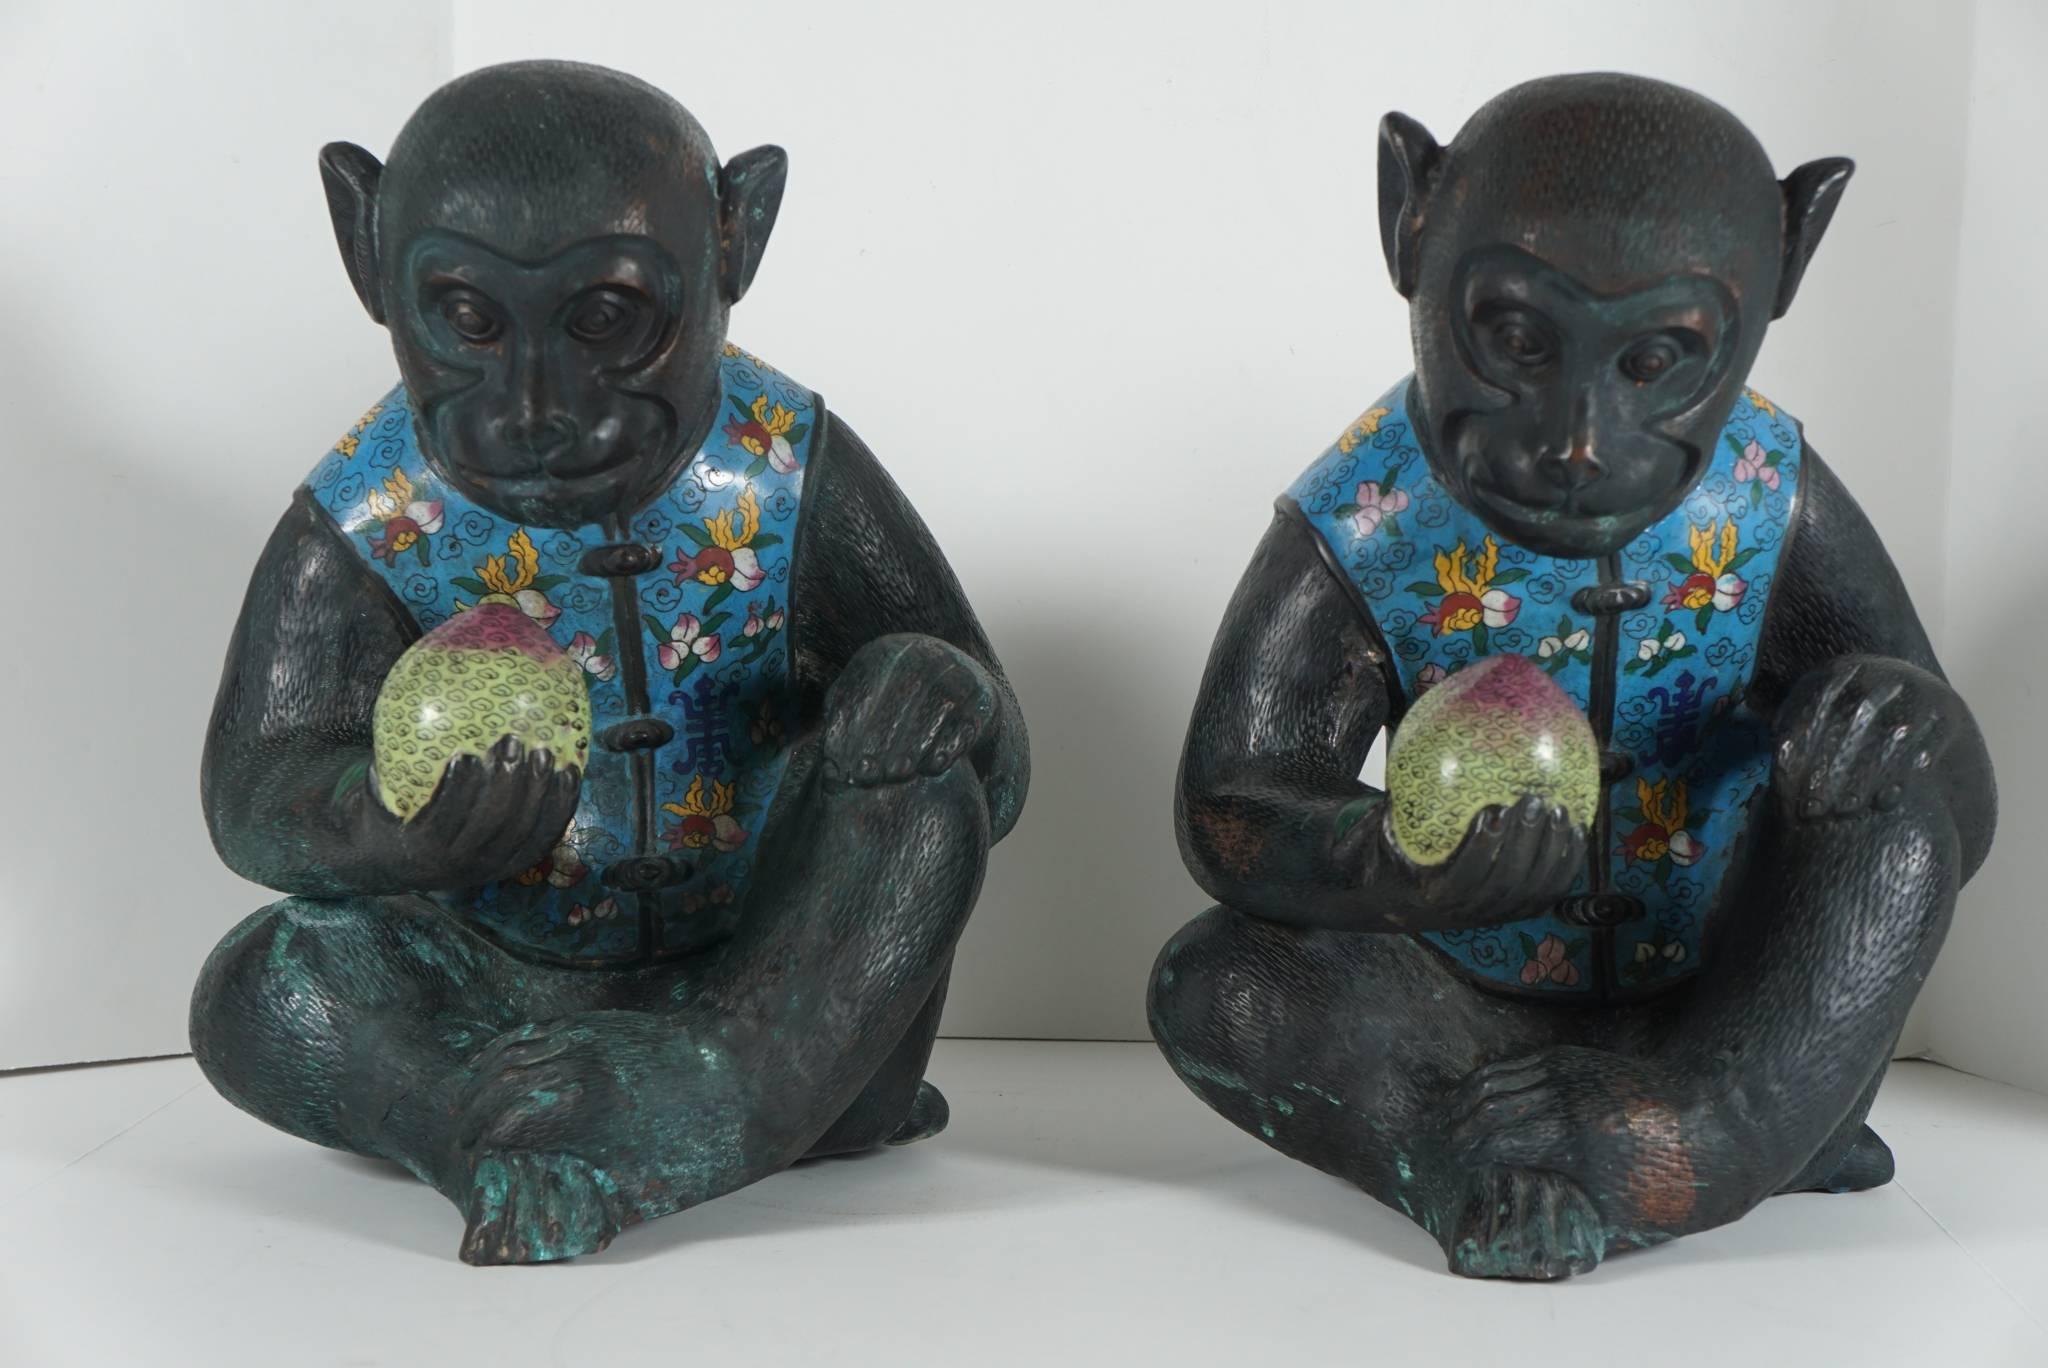 These lovely large-scale figures are dressed in richly patterned blue cloisonne vests and hold a peach in yellow cloisonne enamels, circa 1920-1930. The bodies of the monkeys are repousse copper with many fine details worked from the inside and